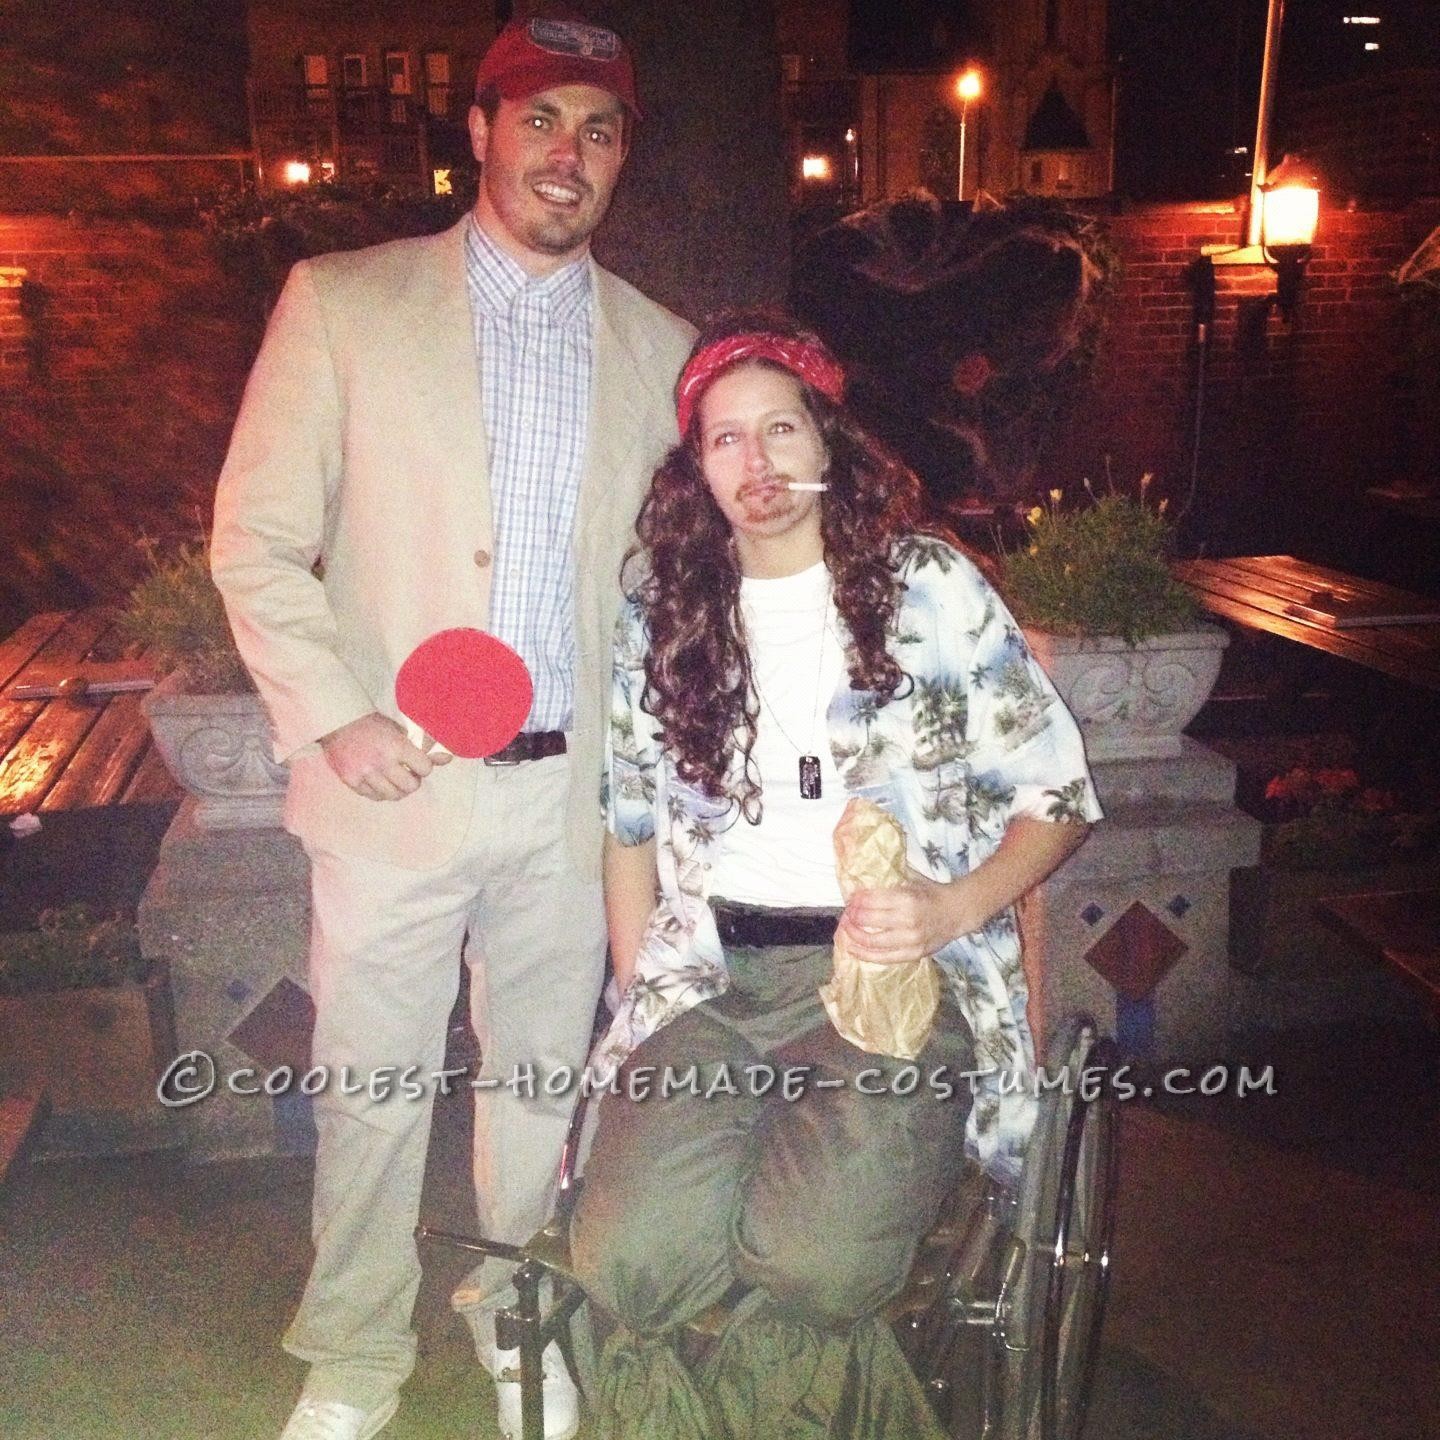 Funny Homemade Couple Costume Idea: Forrest Gump and Lt. Dan